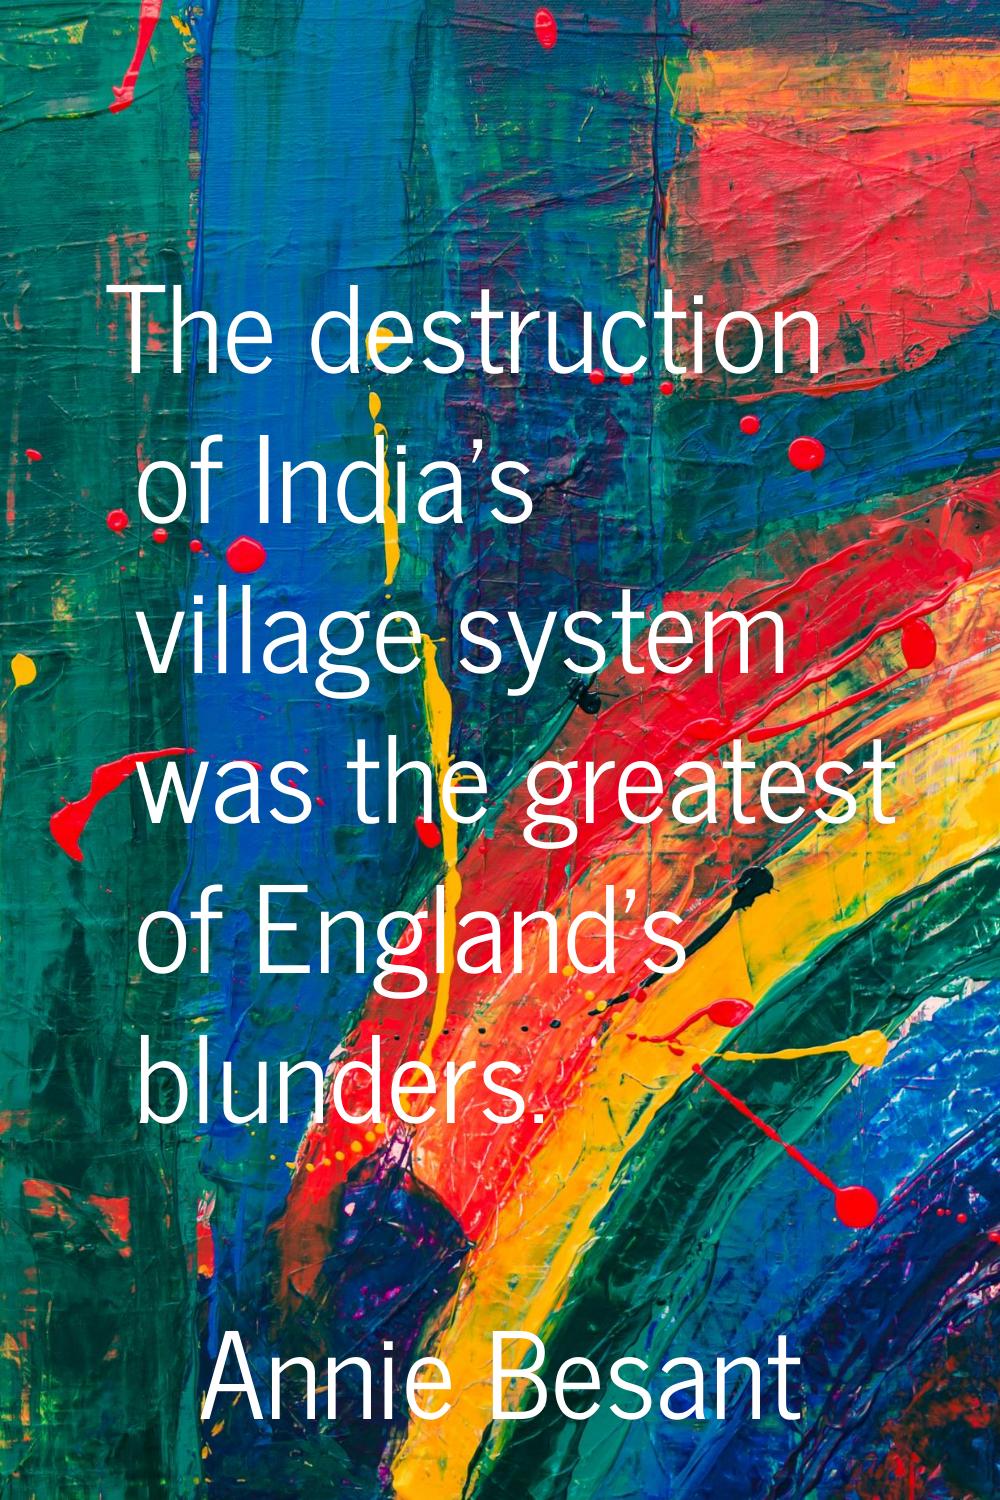 The destruction of India's village system was the greatest of England's blunders.